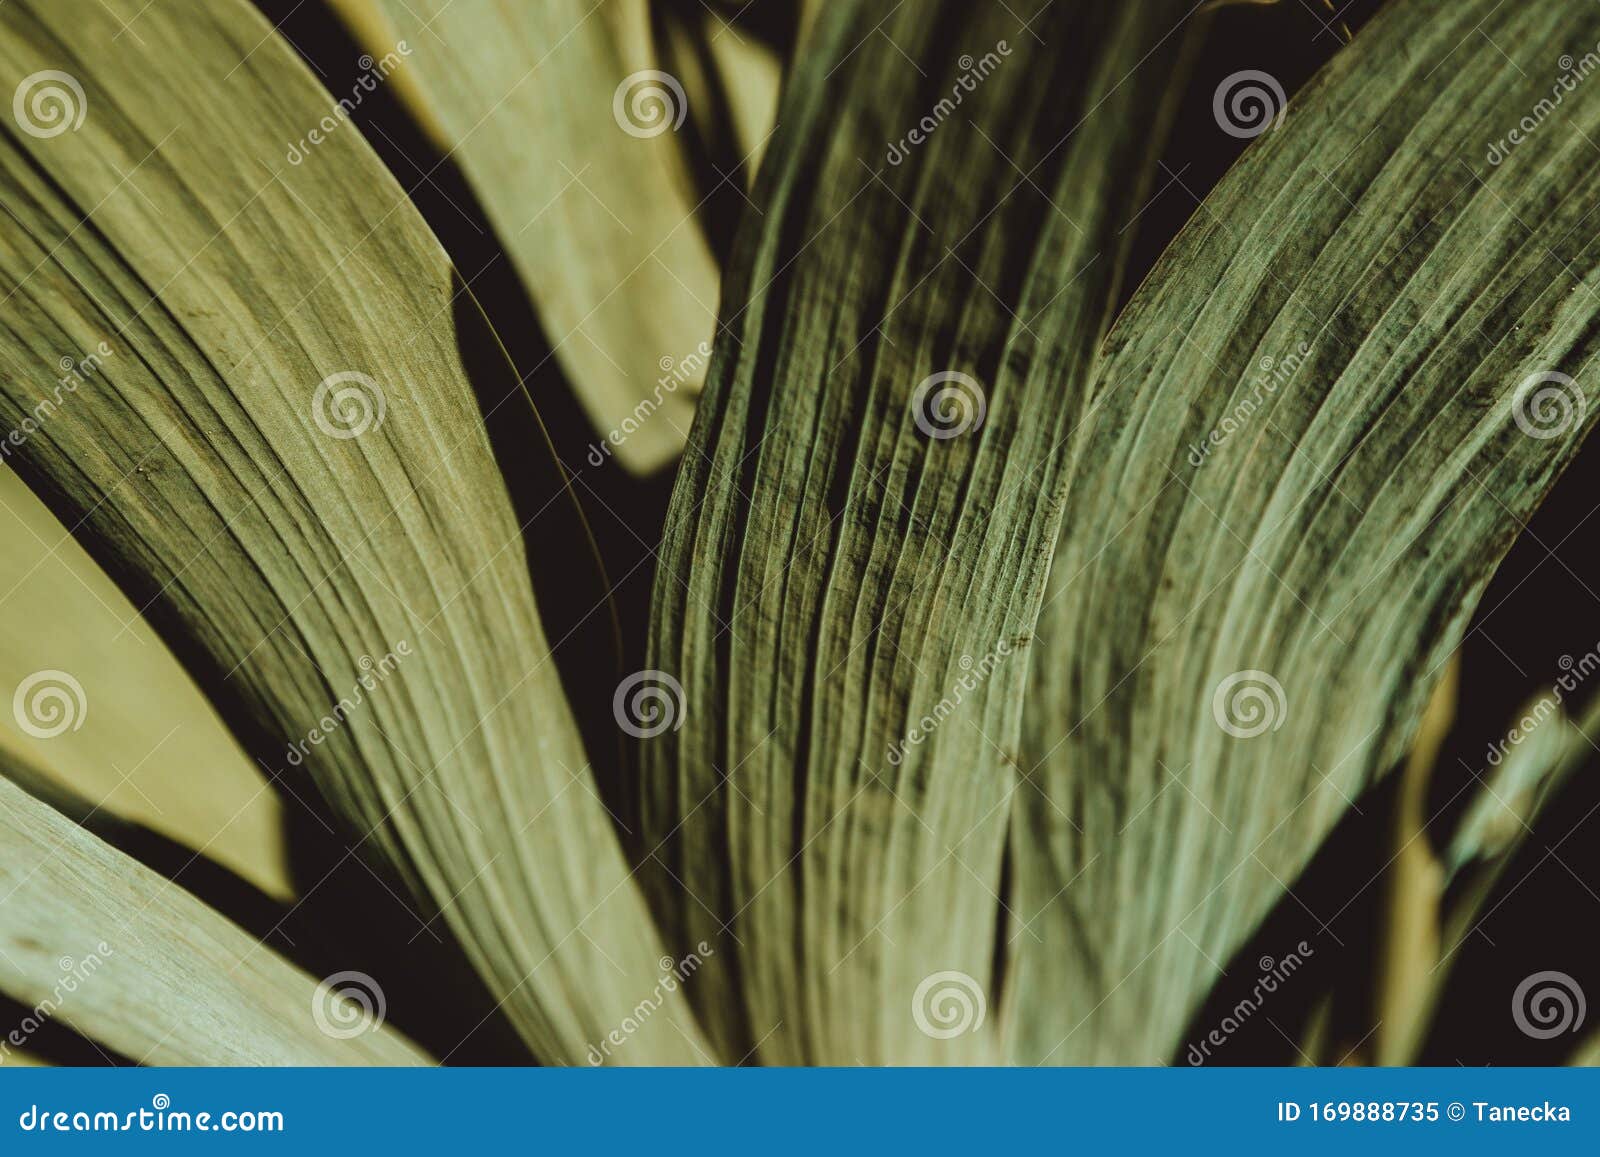 colourless green leaves. green leaf texture. floral background. botanical garden. abstract foliage close-up. nature spring concept